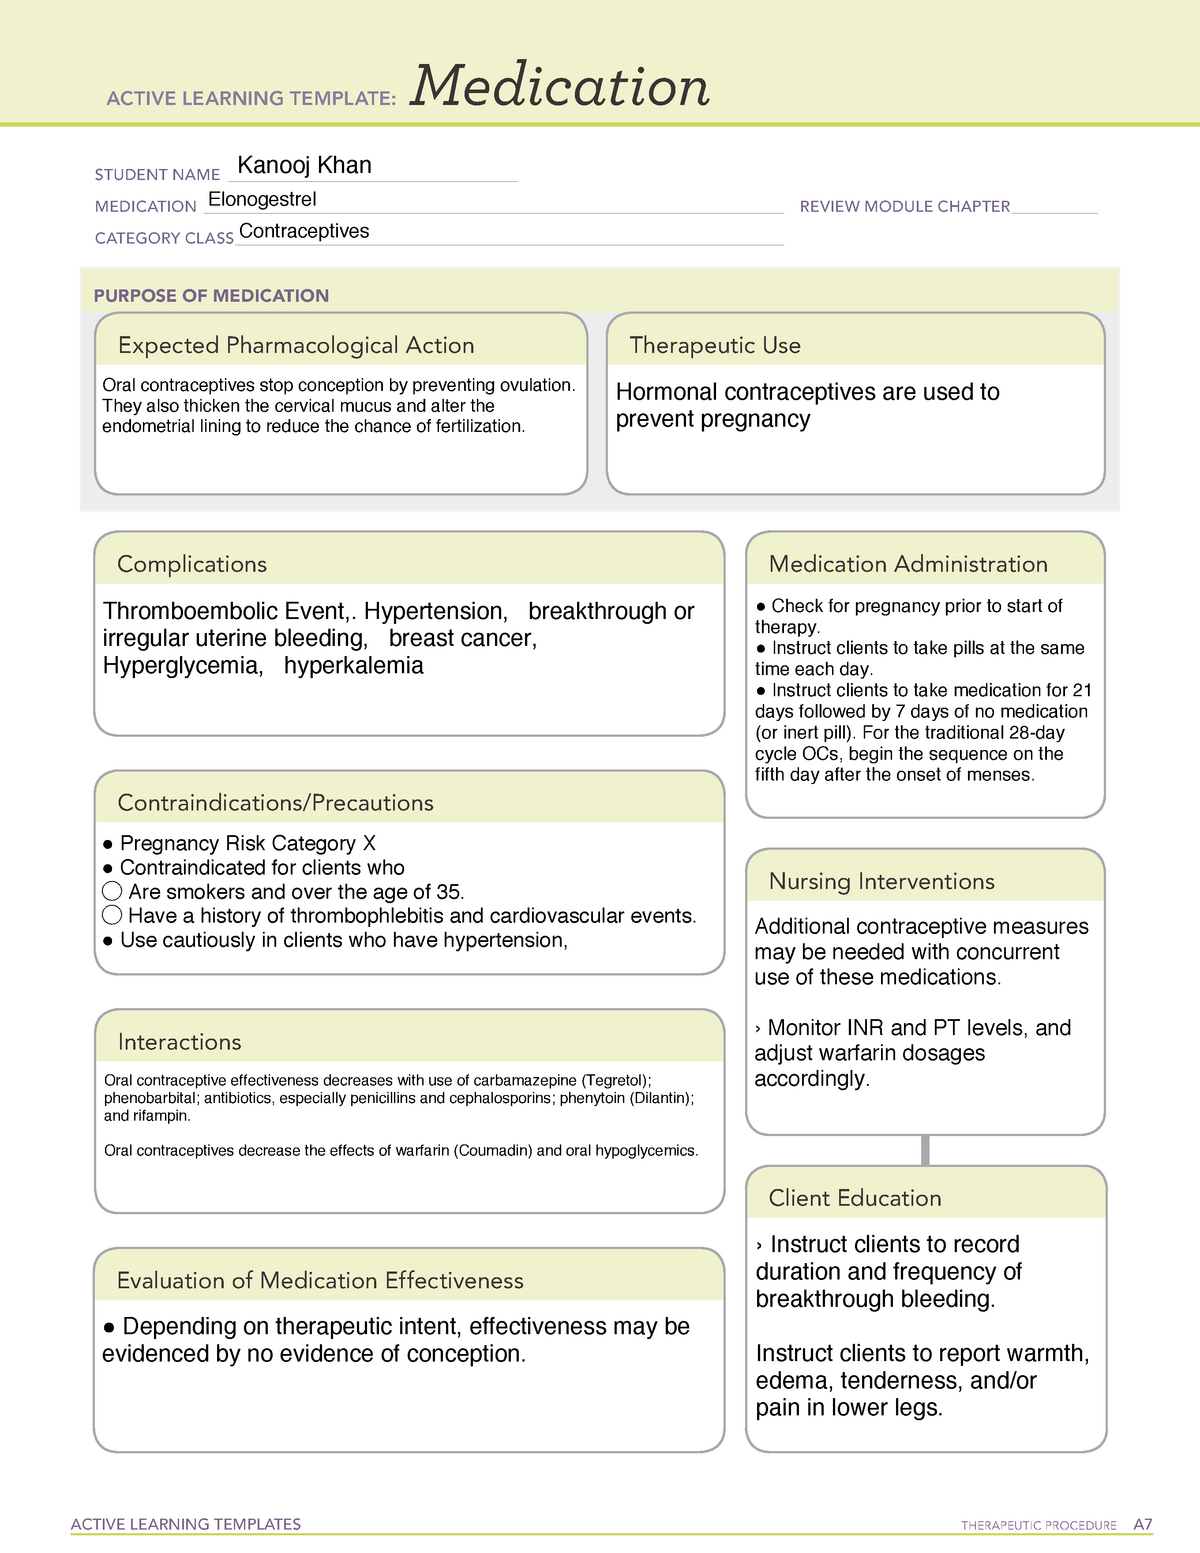 ATI Maternity B2 ati assignment ACTIVE LEARNING TEMPLATES